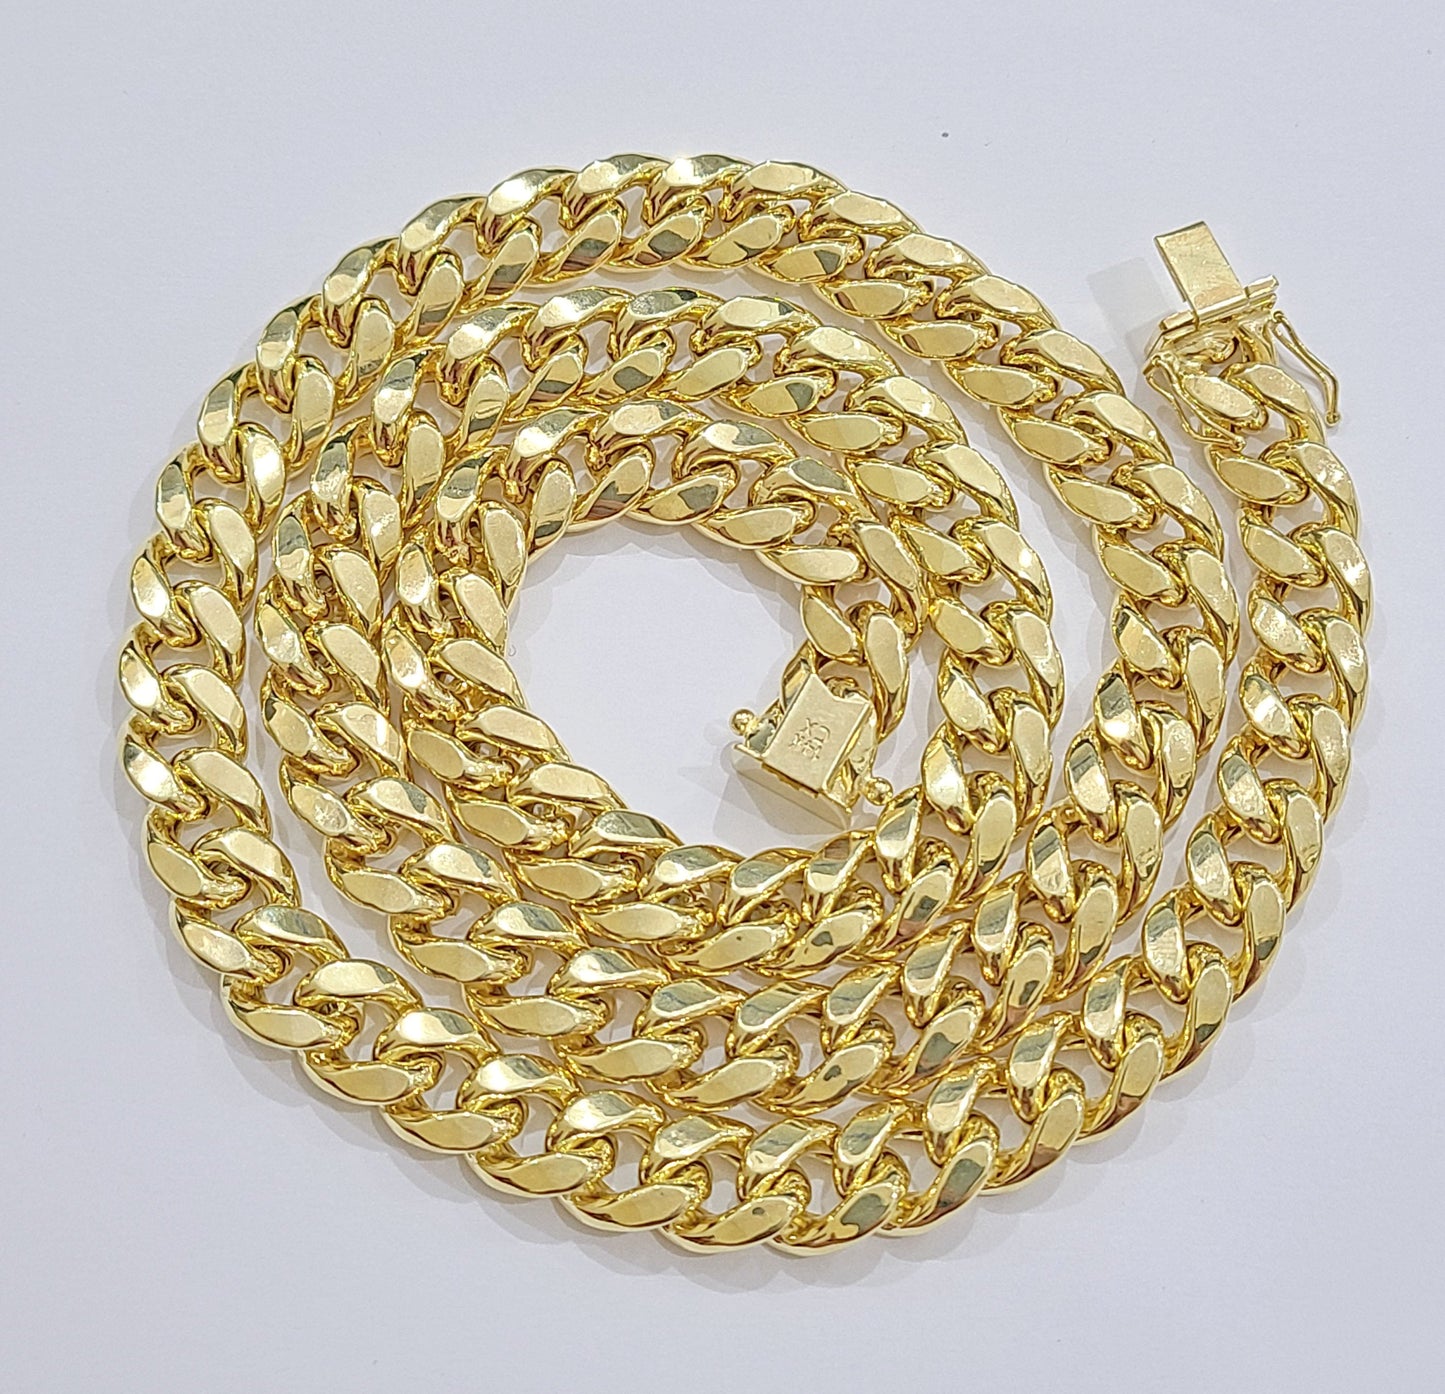 Real 14k Yellow Gold Miami Cuban Link Chain 11mm 26" Necklace Box Lock For Men